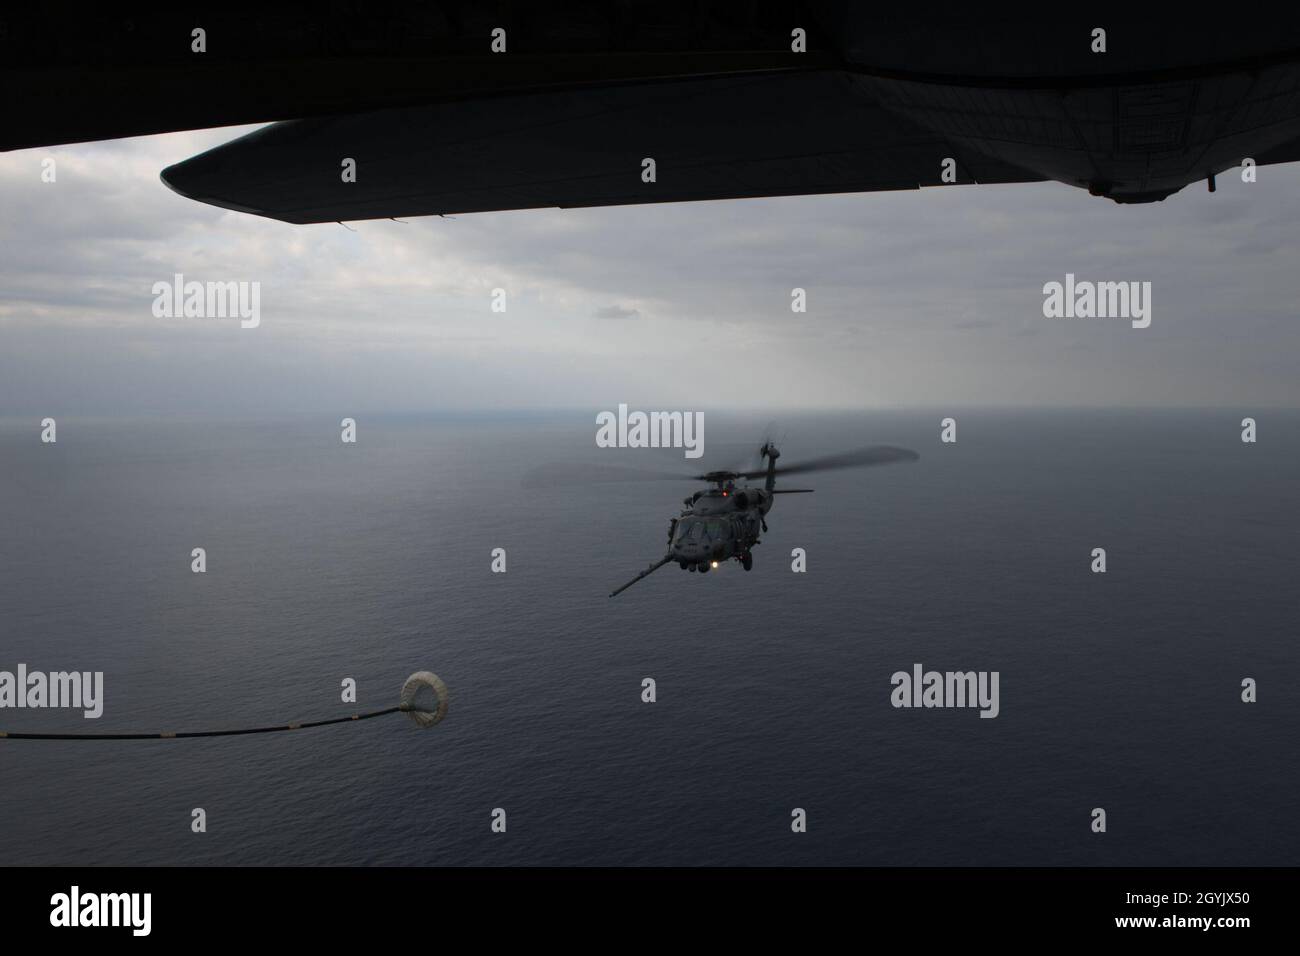 An HH-60G Pave Hawk assigned to the 33rd Rescue Squadron flies in to perform helicopter air-to-air refueling with an MC-130J Commando II from the 17th Special Operations Squadron above the Pacific Ocean during Exercise Westpac Rumrunner Jan. 10, 2020. WestPac  Rumrunner provides 18th Wing assets opportunities to hone critical expeditionary skillsets with joint partners across the Indo-Pacific. (U.S. Air Force photo by Staff Sgt. Benjamin Sutton) Stock Photo